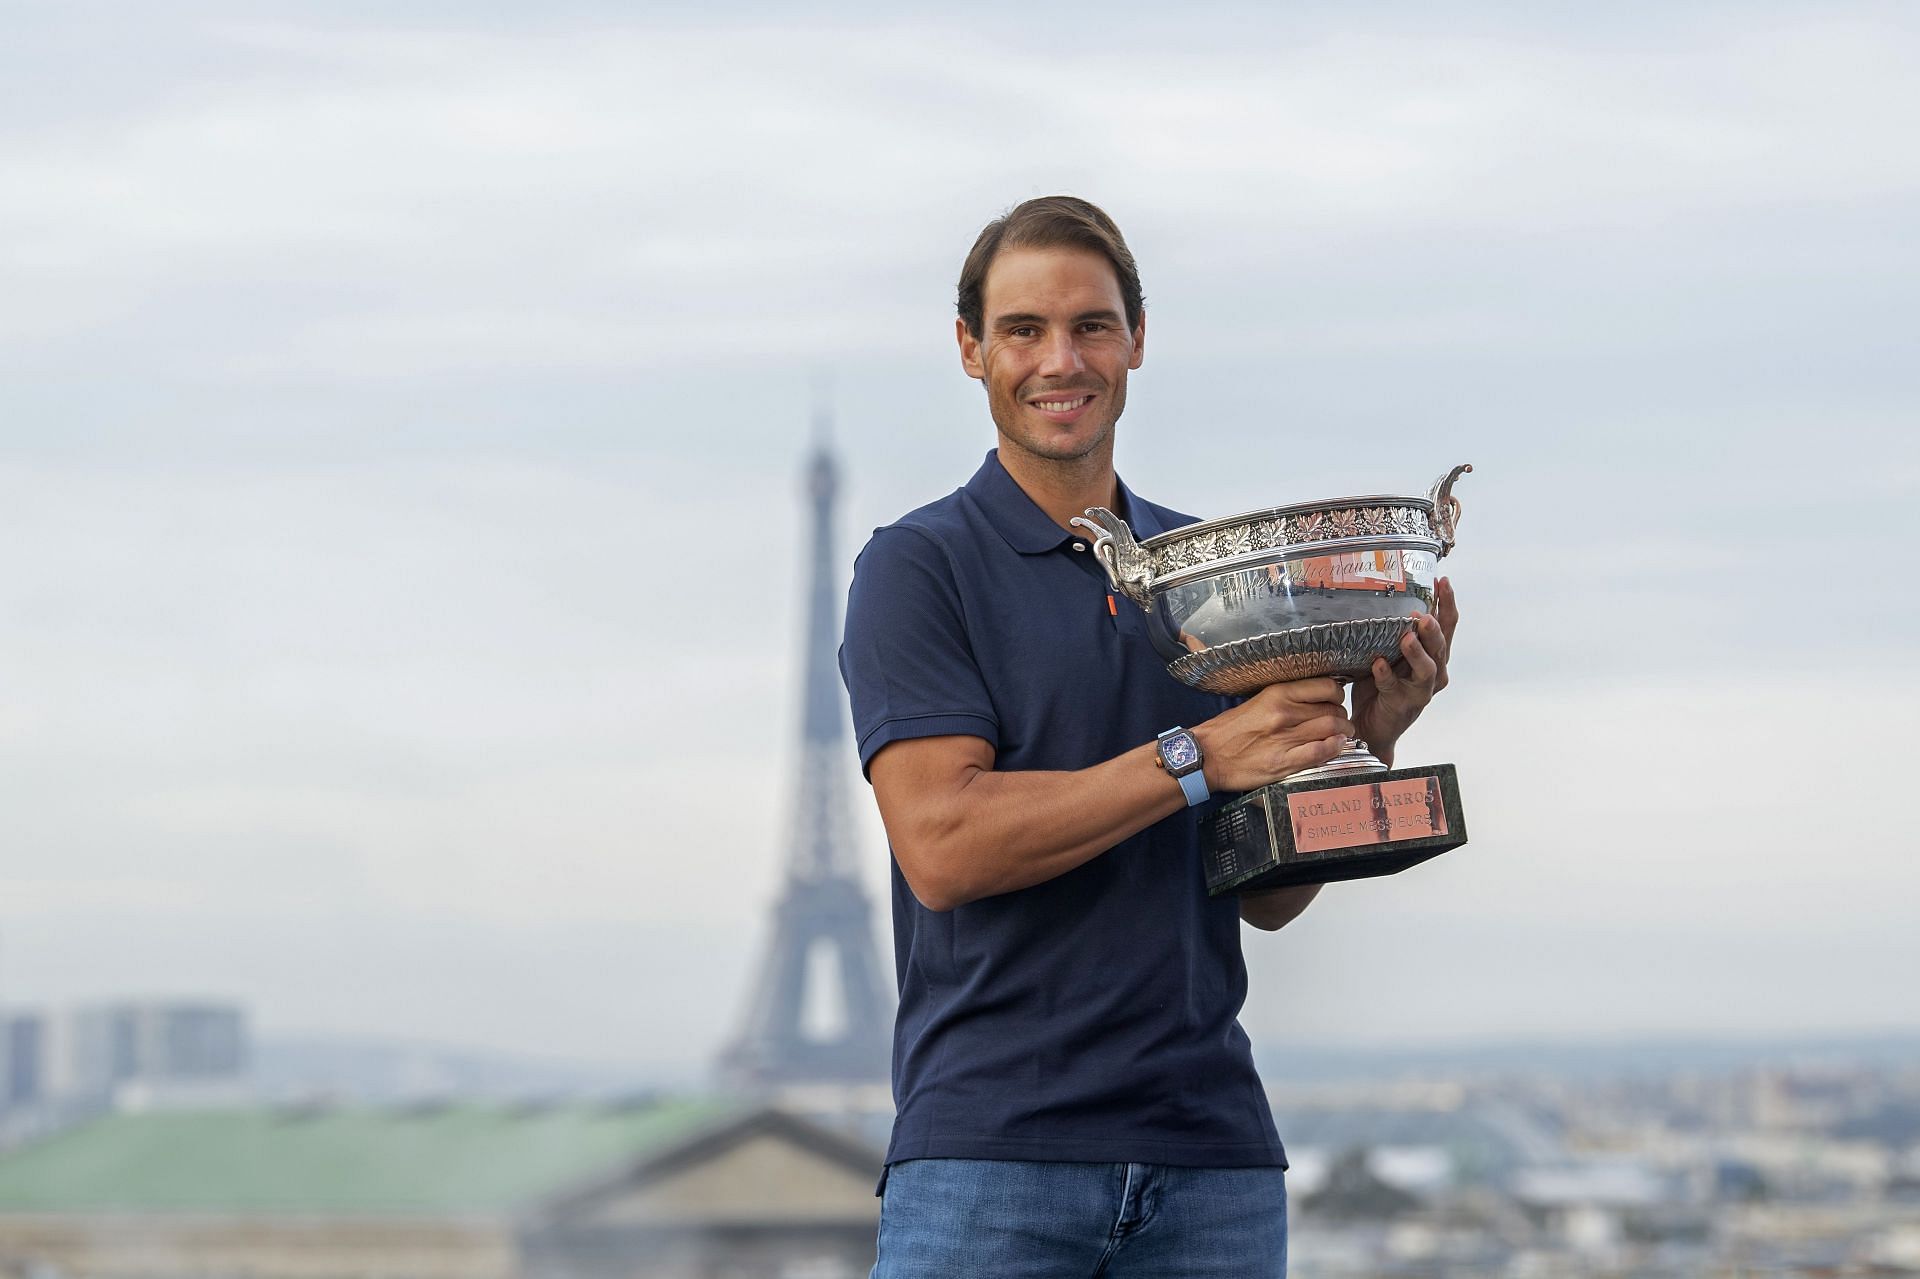 Rafael Nadal has participated in 63 Grand Slams till date, his favorite being the French Open